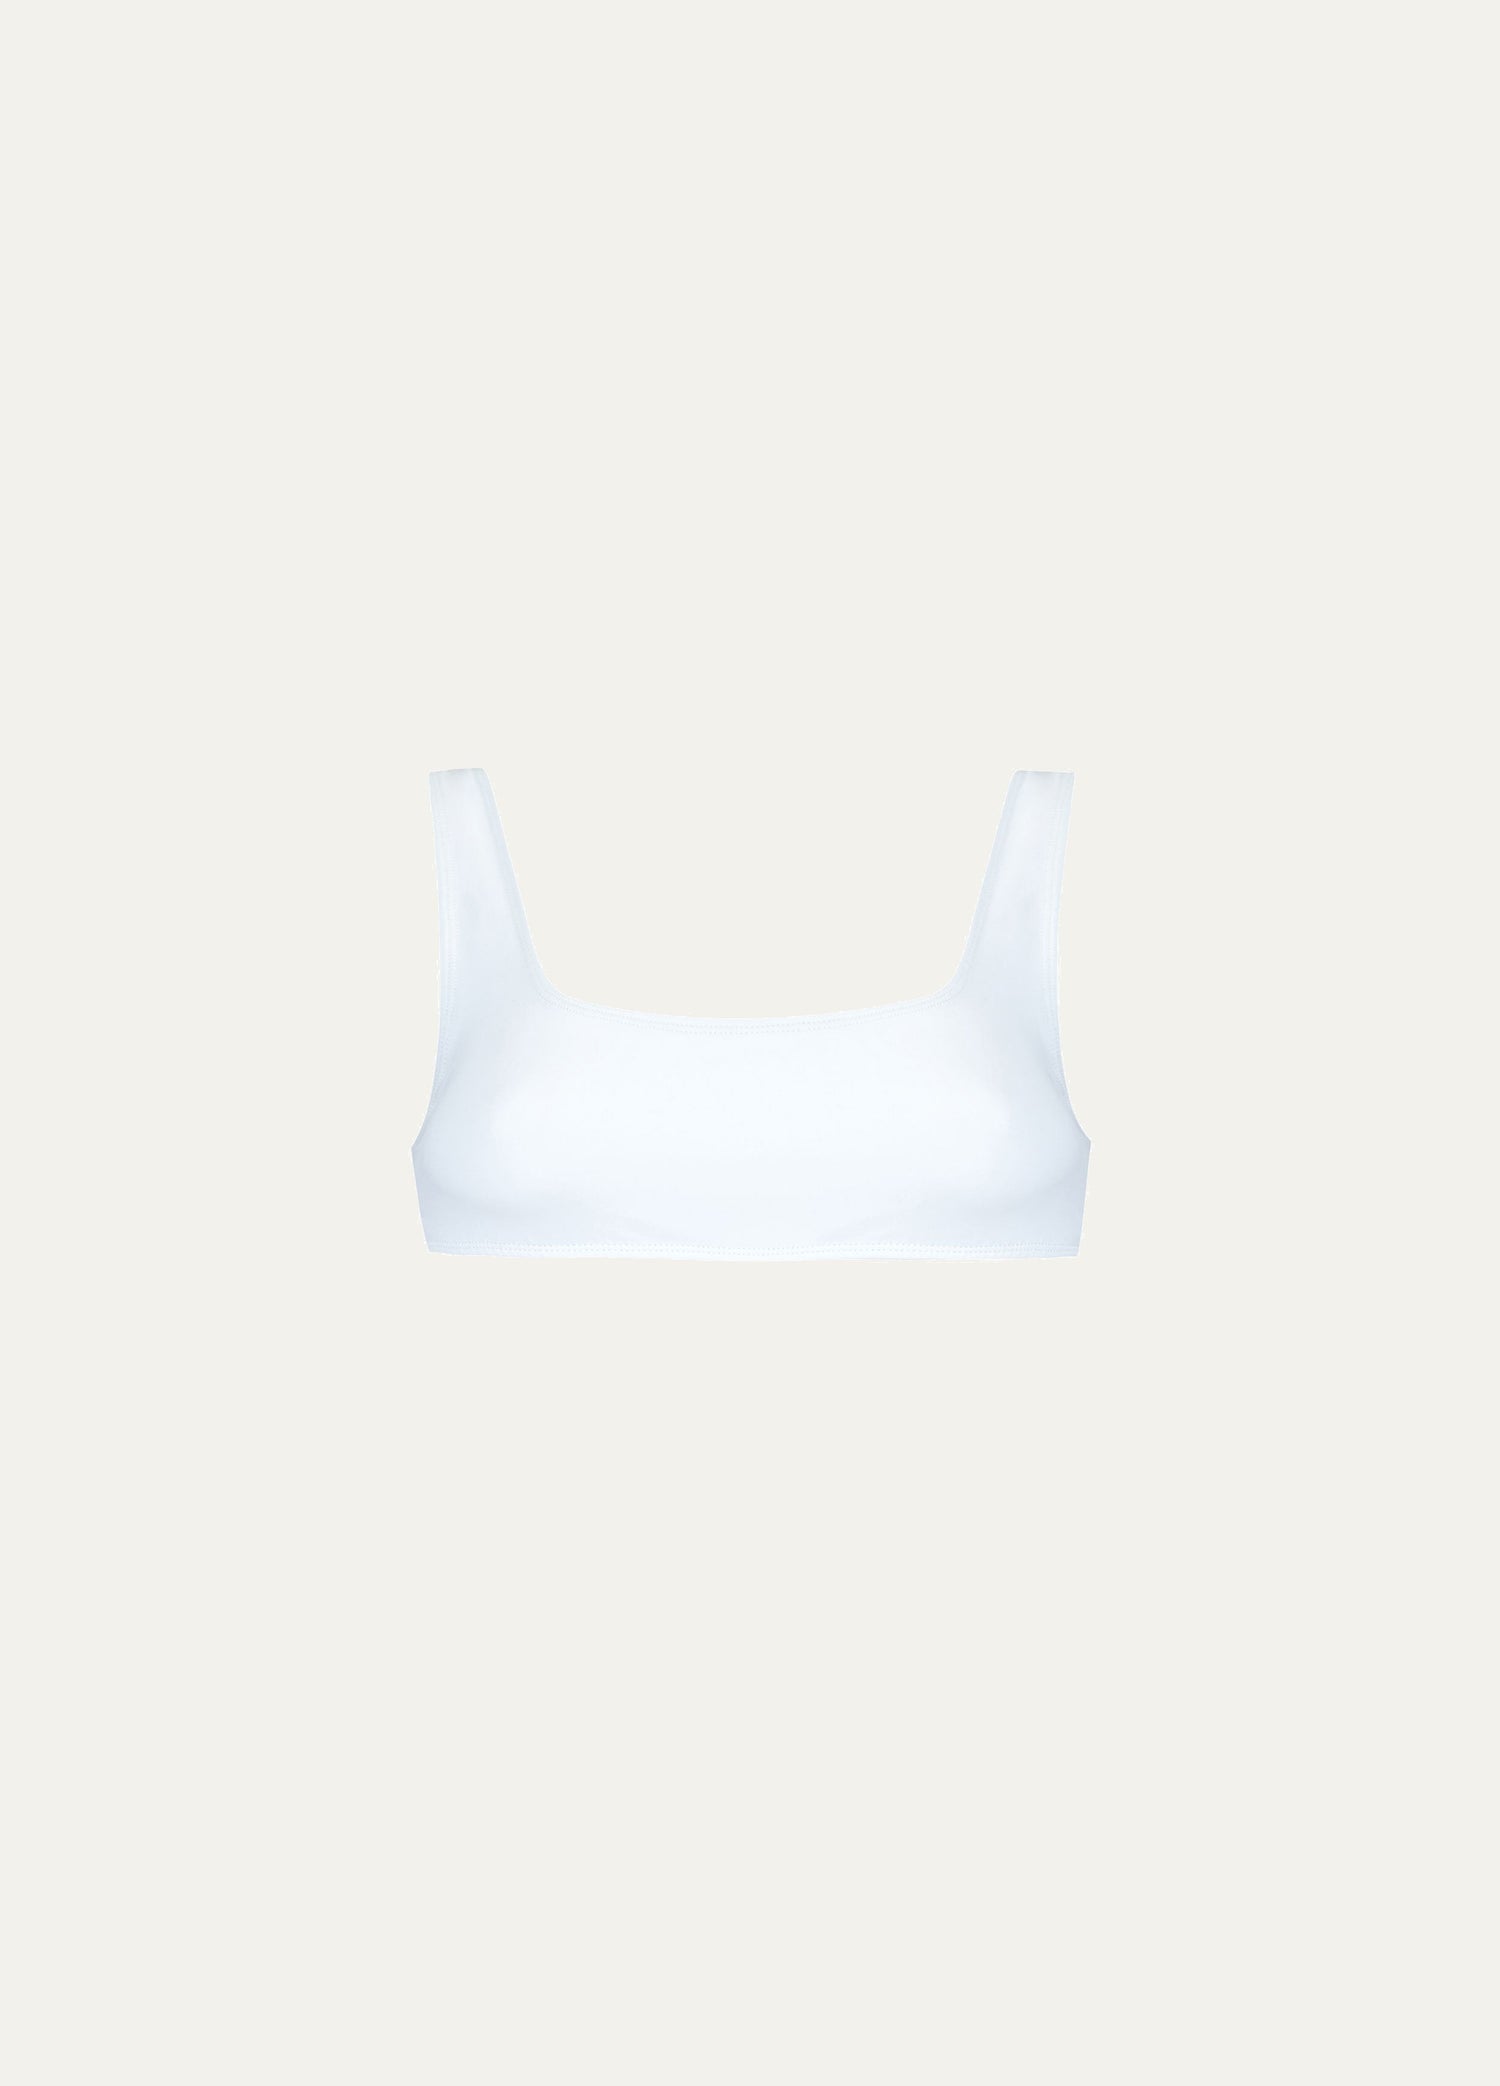 The Athletic Top - Matte Fabric Talia Collins